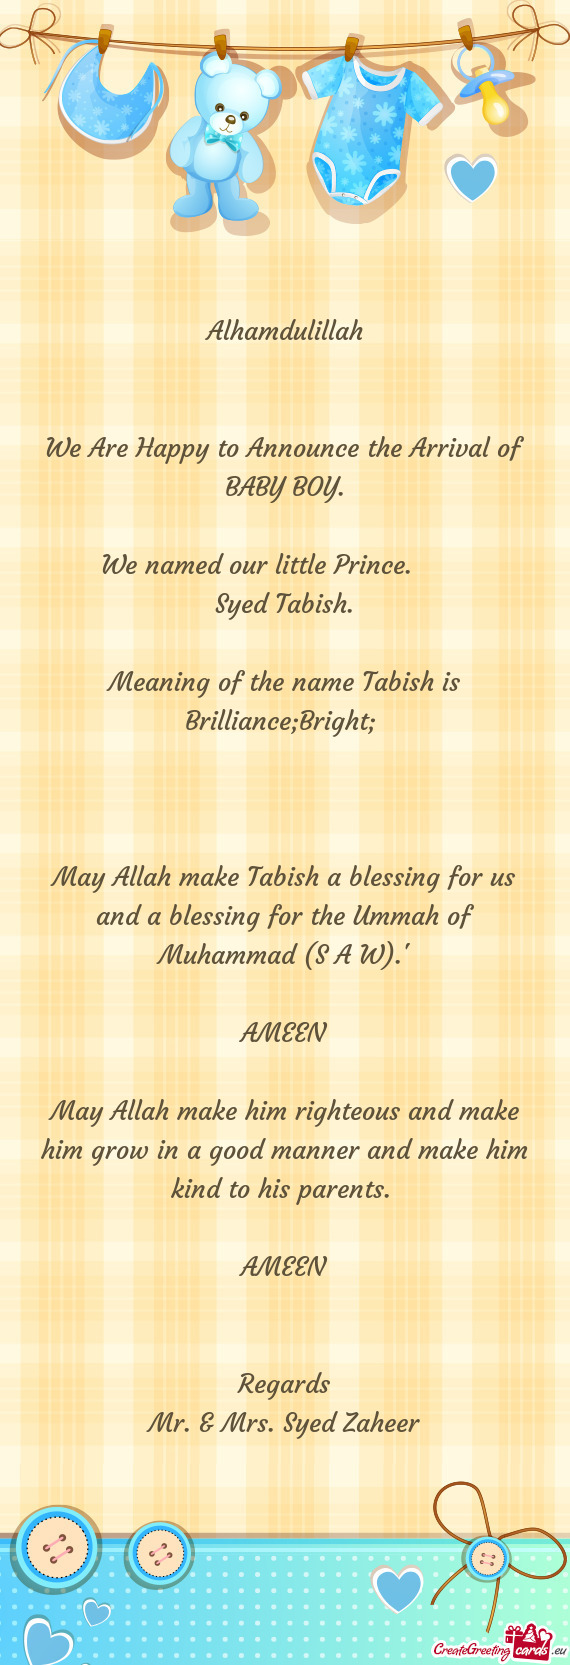 Meaning of the name Tabish is Brilliance;Bright;